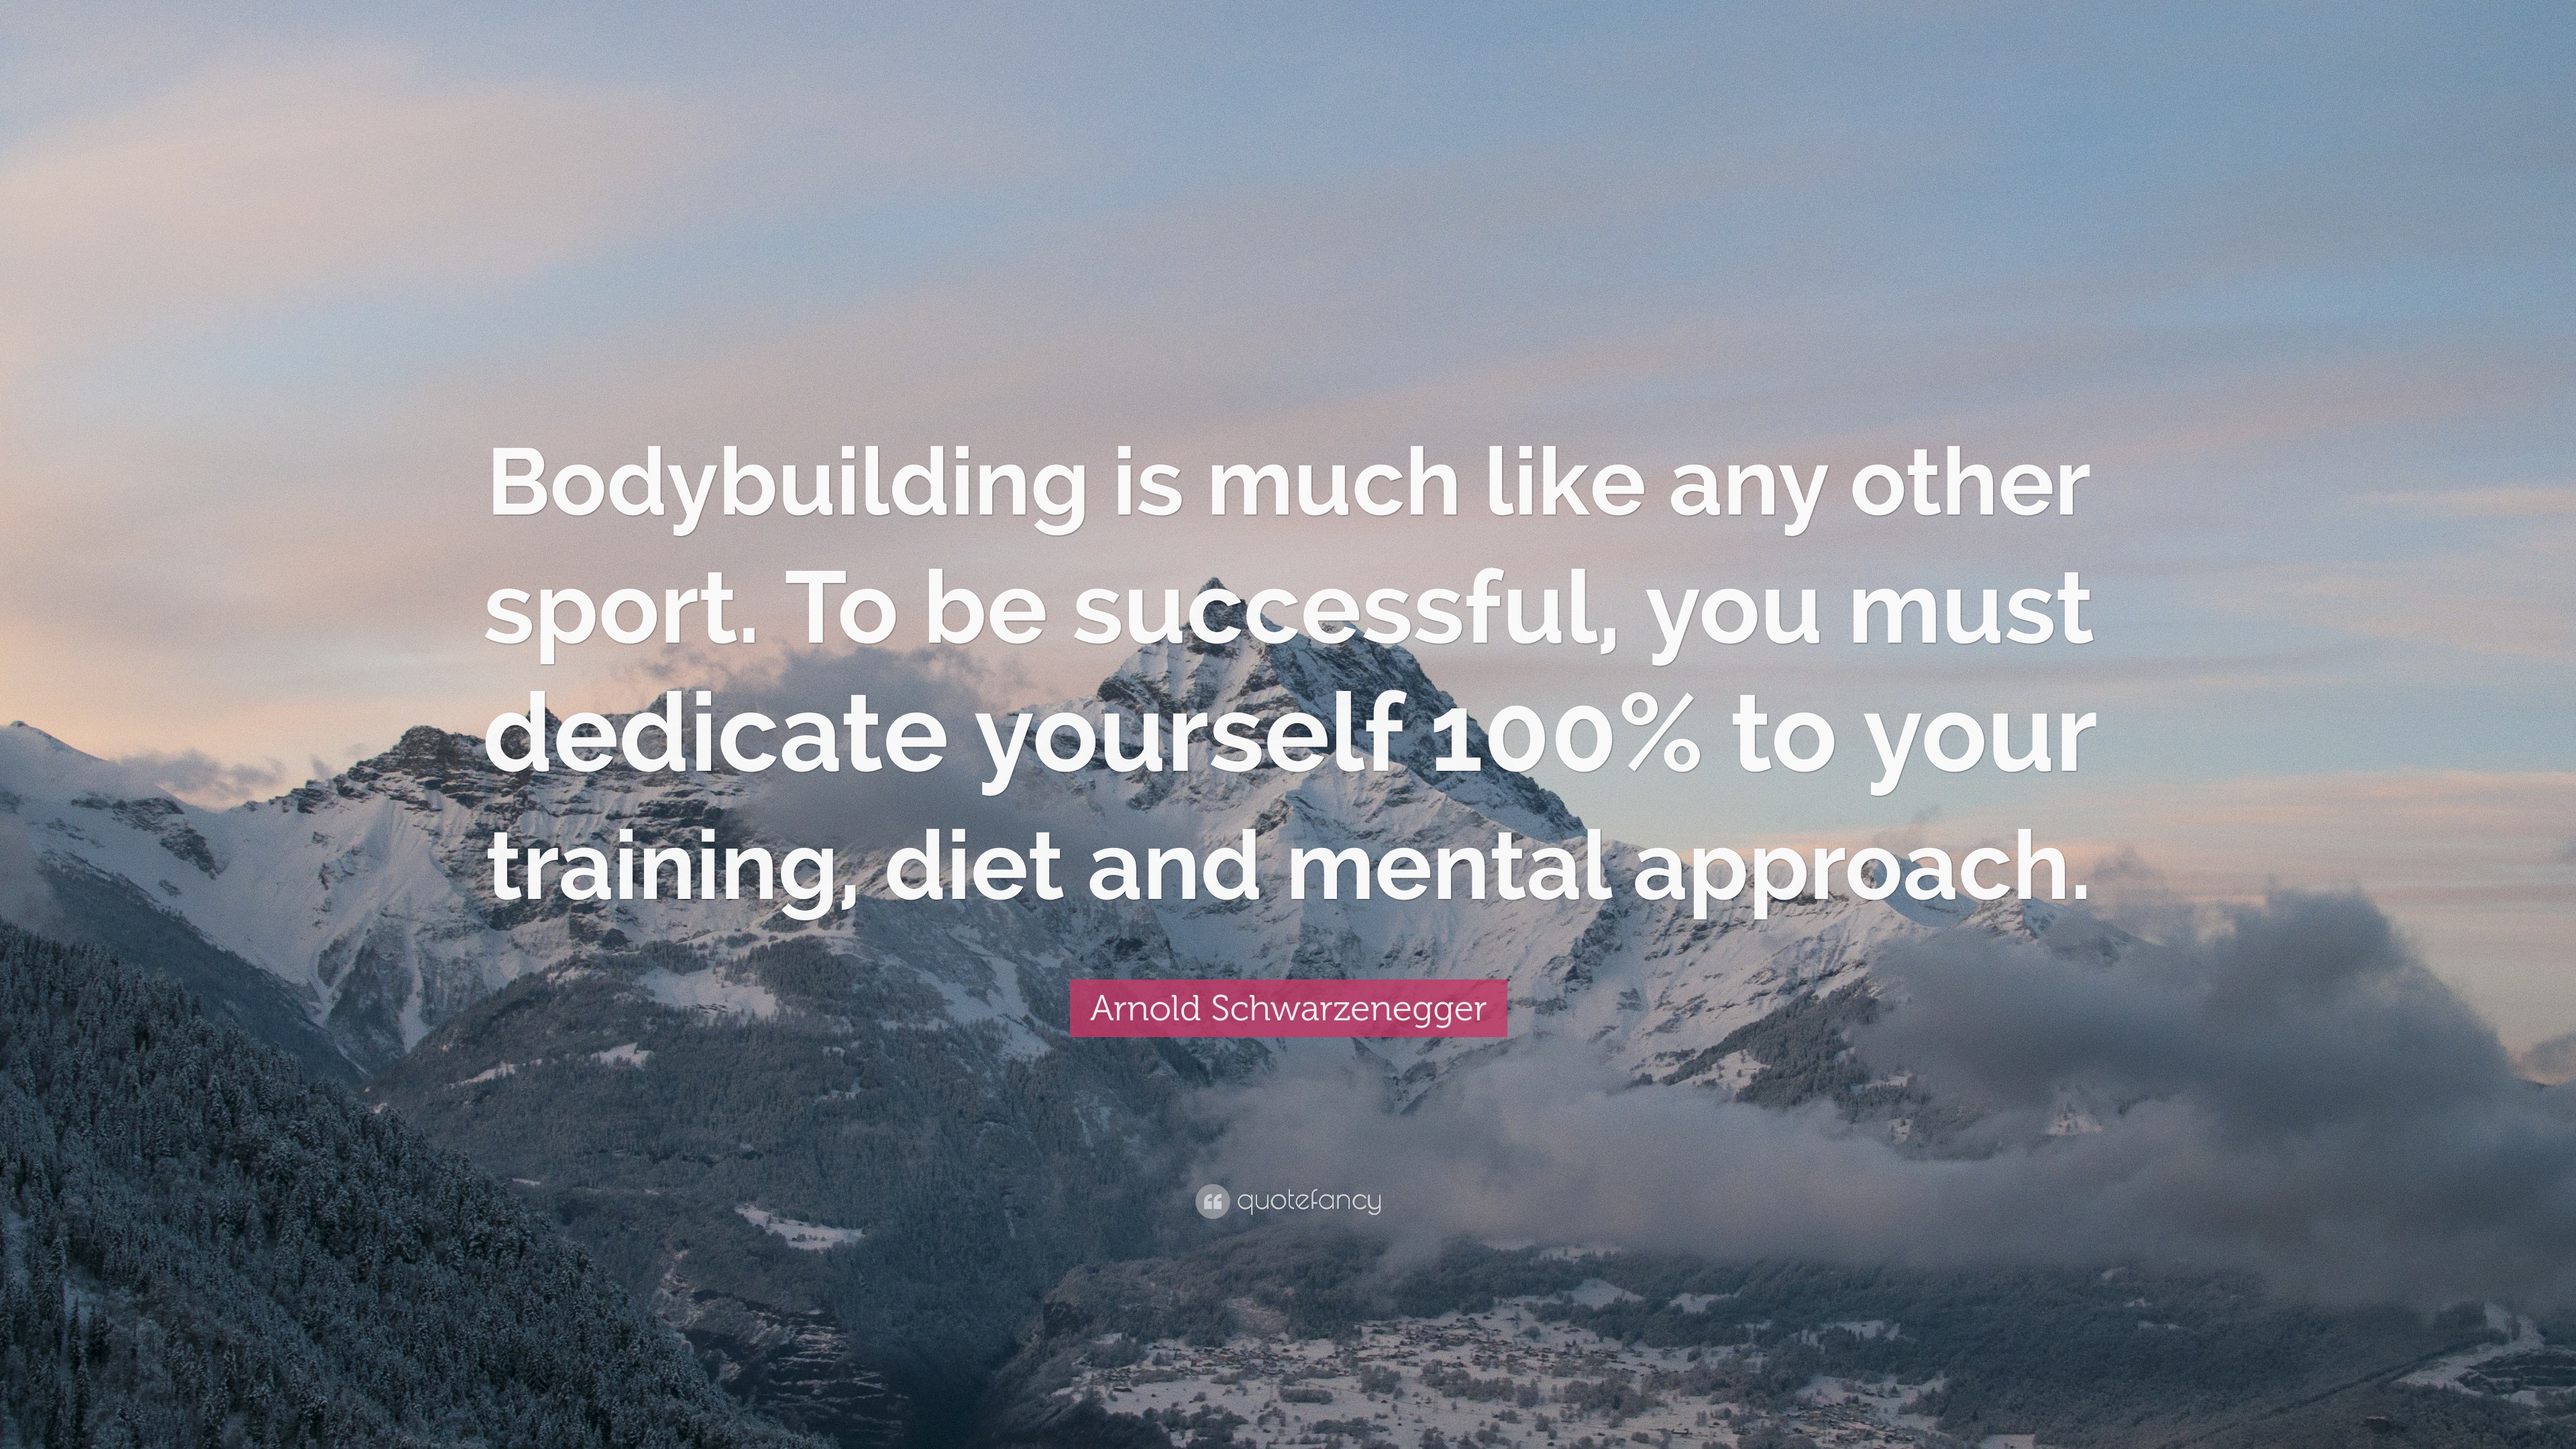 101 Motivational Quotes About Exercise From Famous Athletes